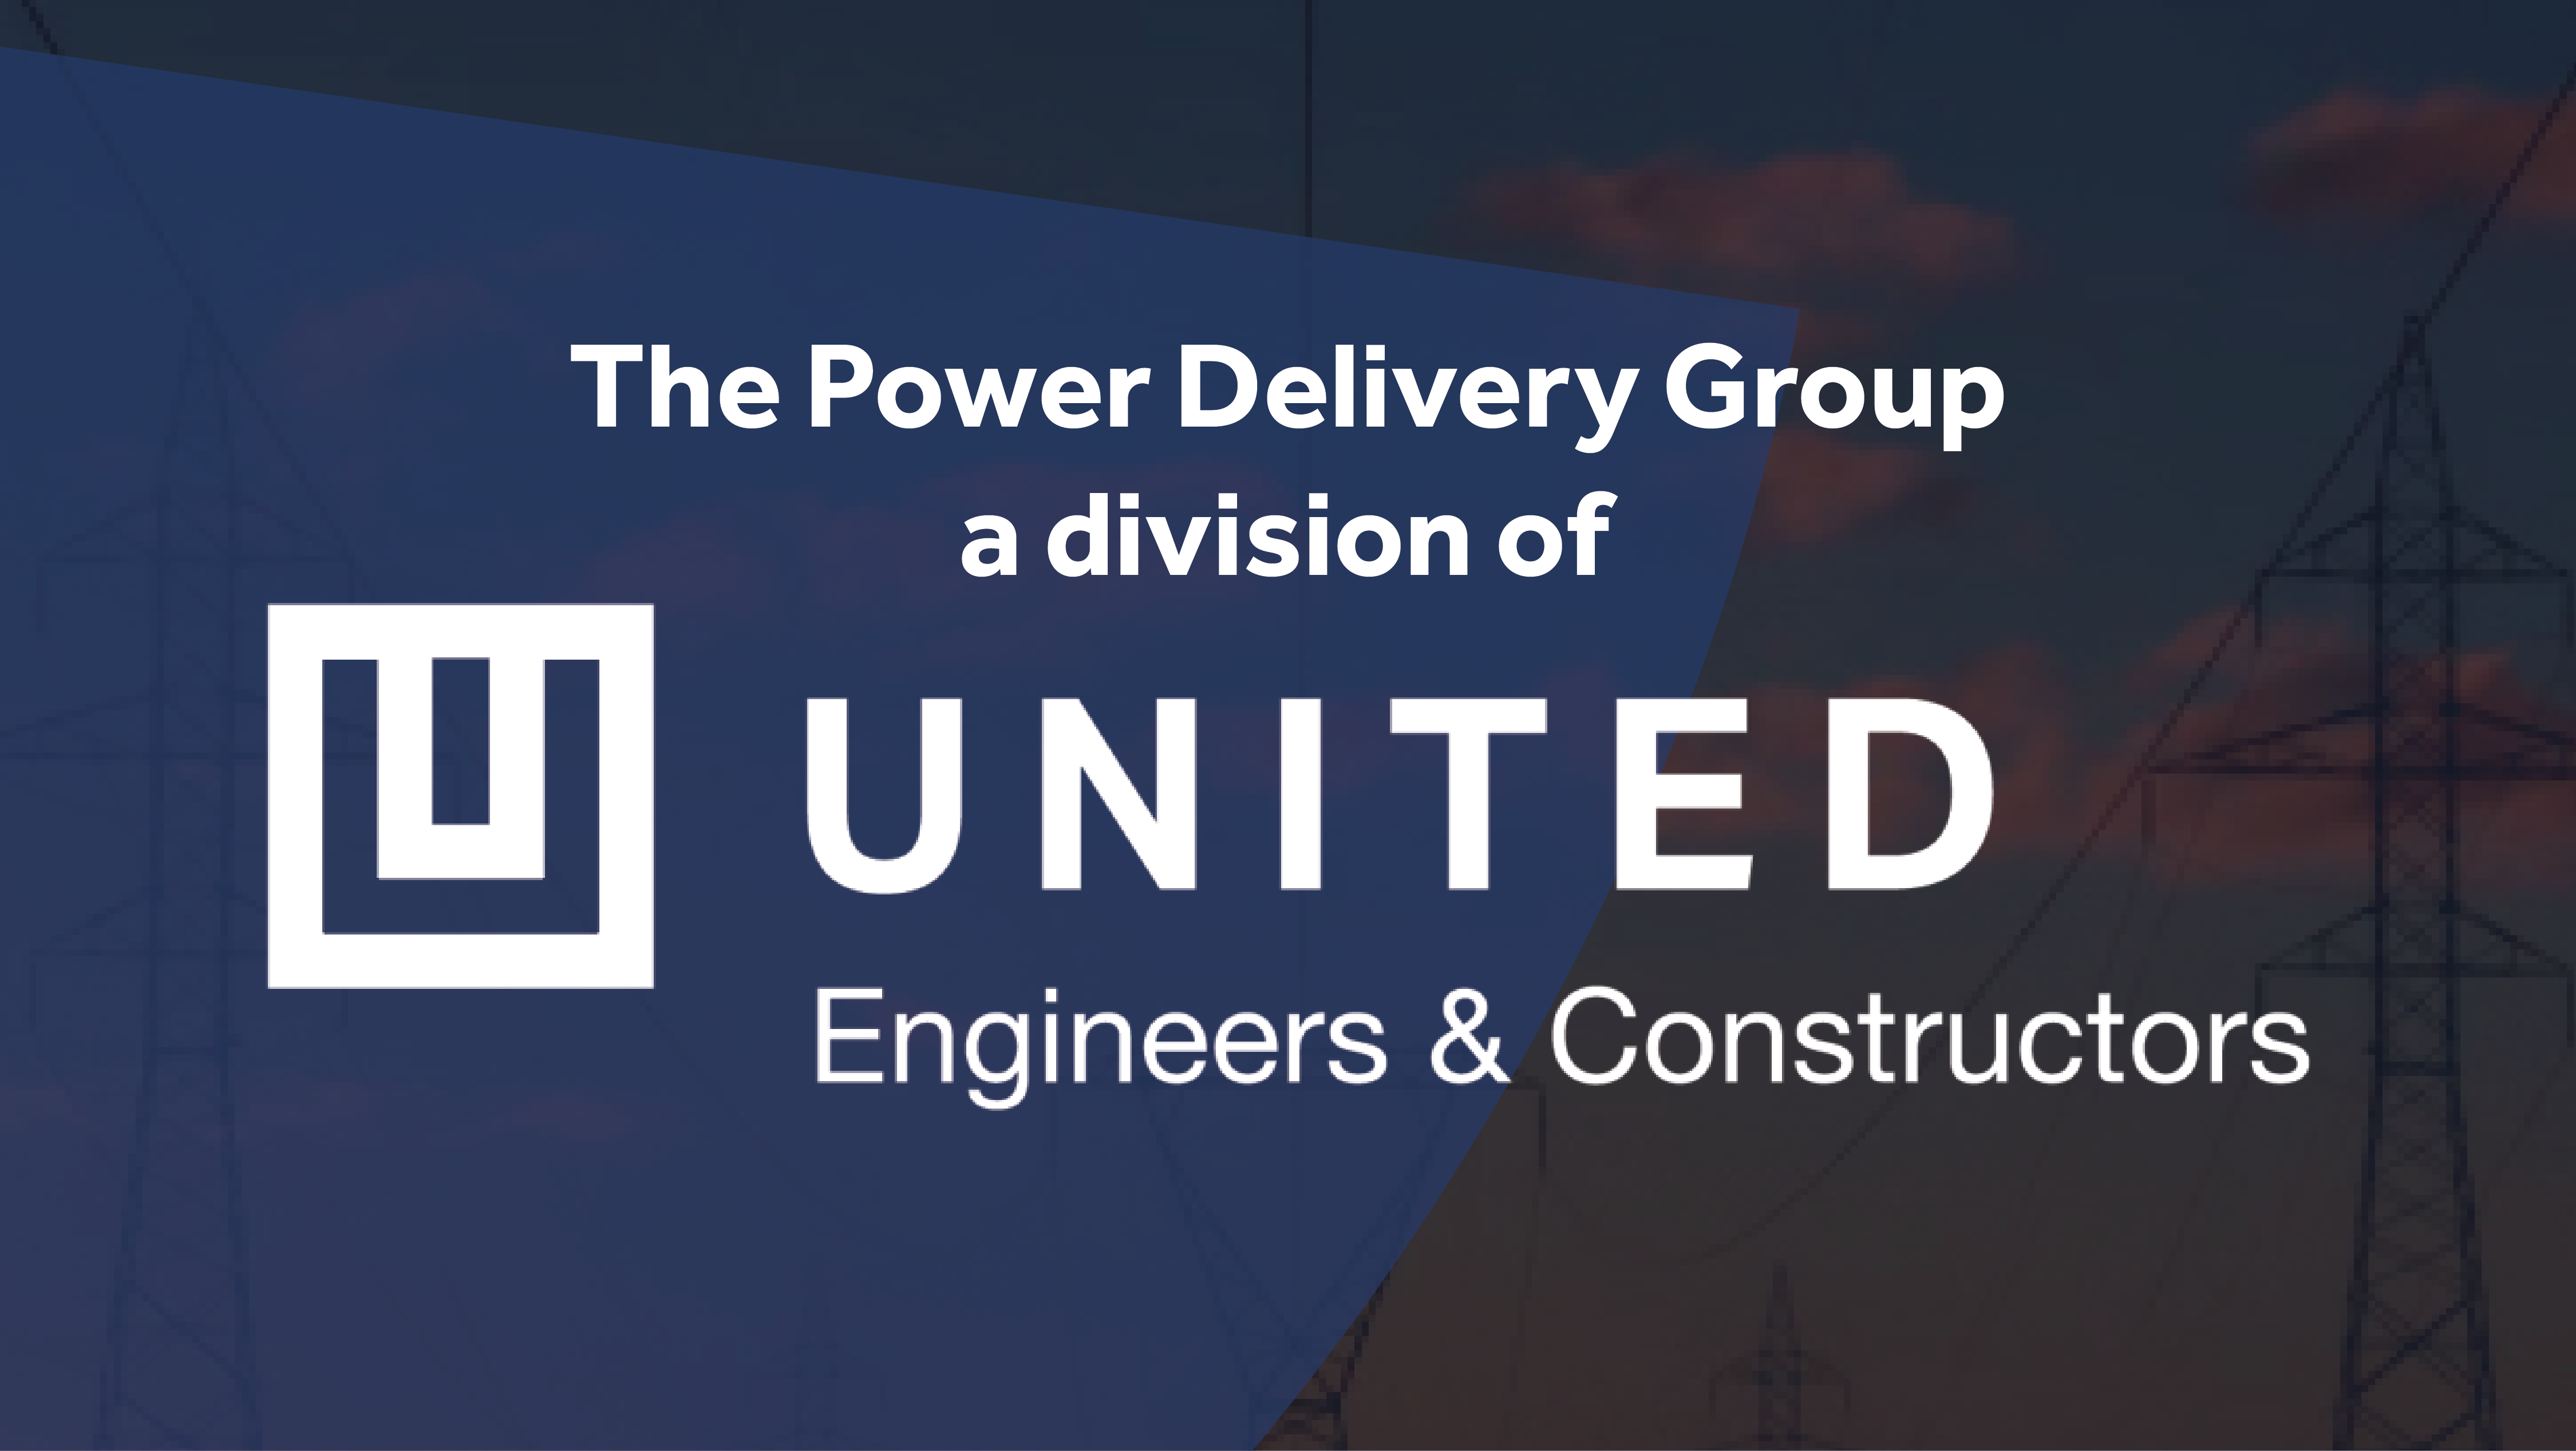 Affiliates of CriticalPoint Complete Sale of United Power Delivery Business Unit to Pike Corporation